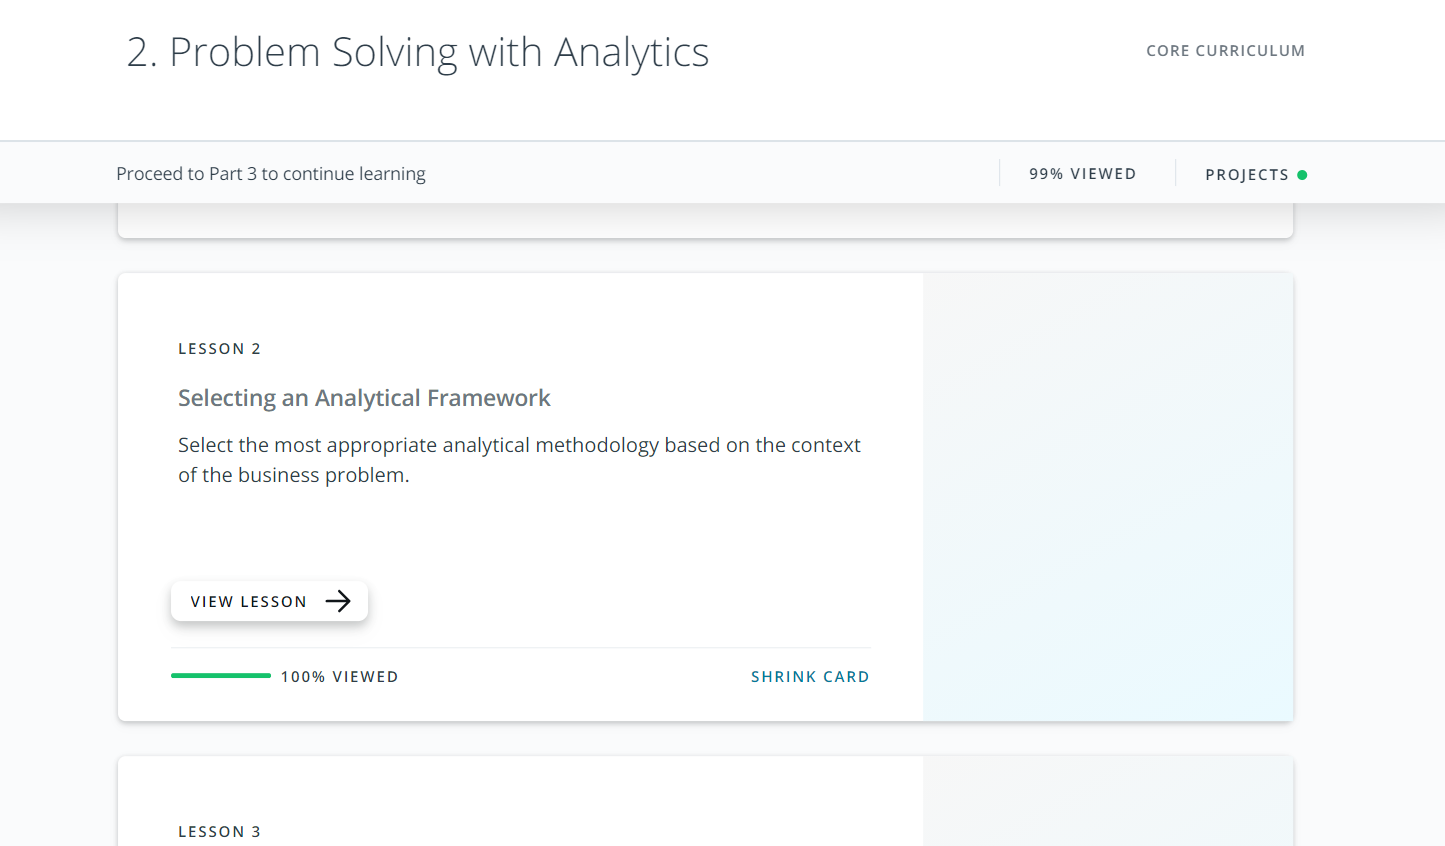 Problem Solving with Analytics